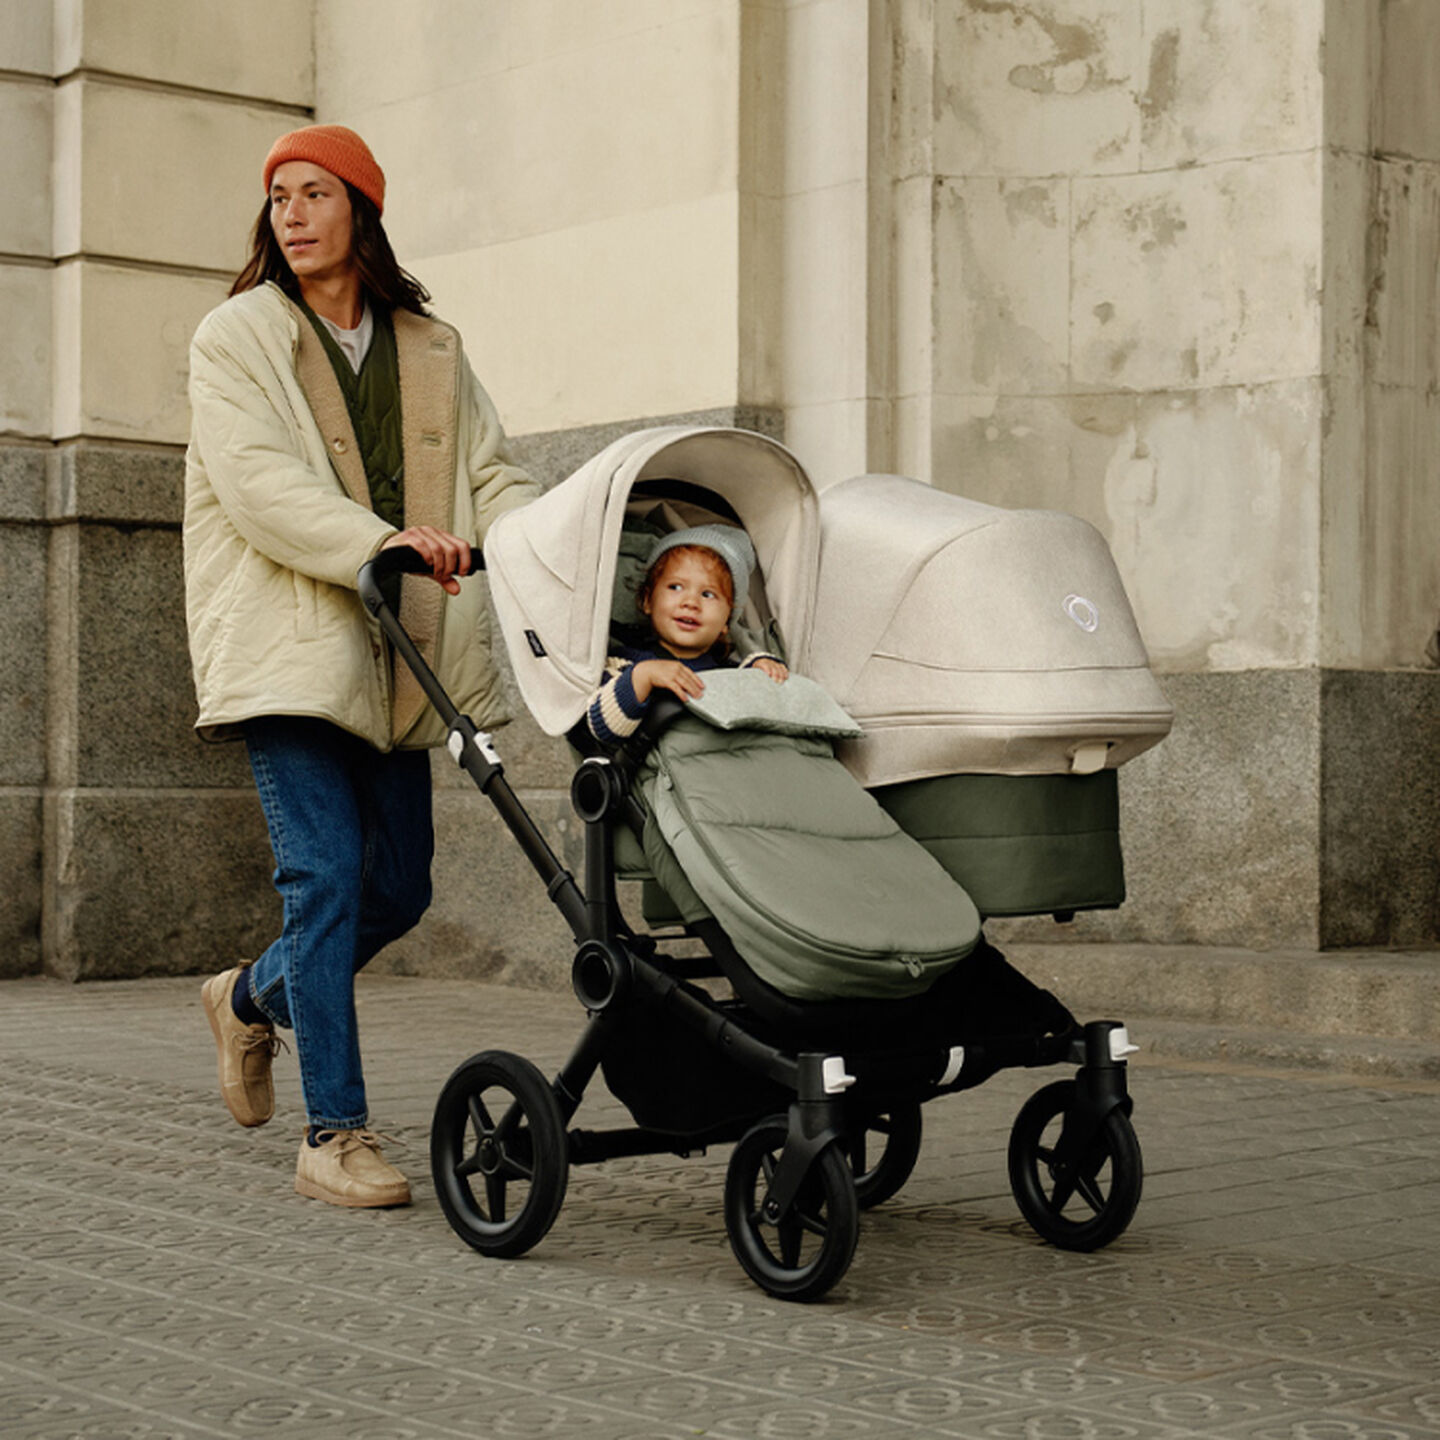 A father walks with his kids in the Bugaboo Donkey 5 Duo stroller. His toddler sits on the left seat inside a footmuff. The bassinet on the right faces the other way, showing the Bugaboo logo on the canopy.